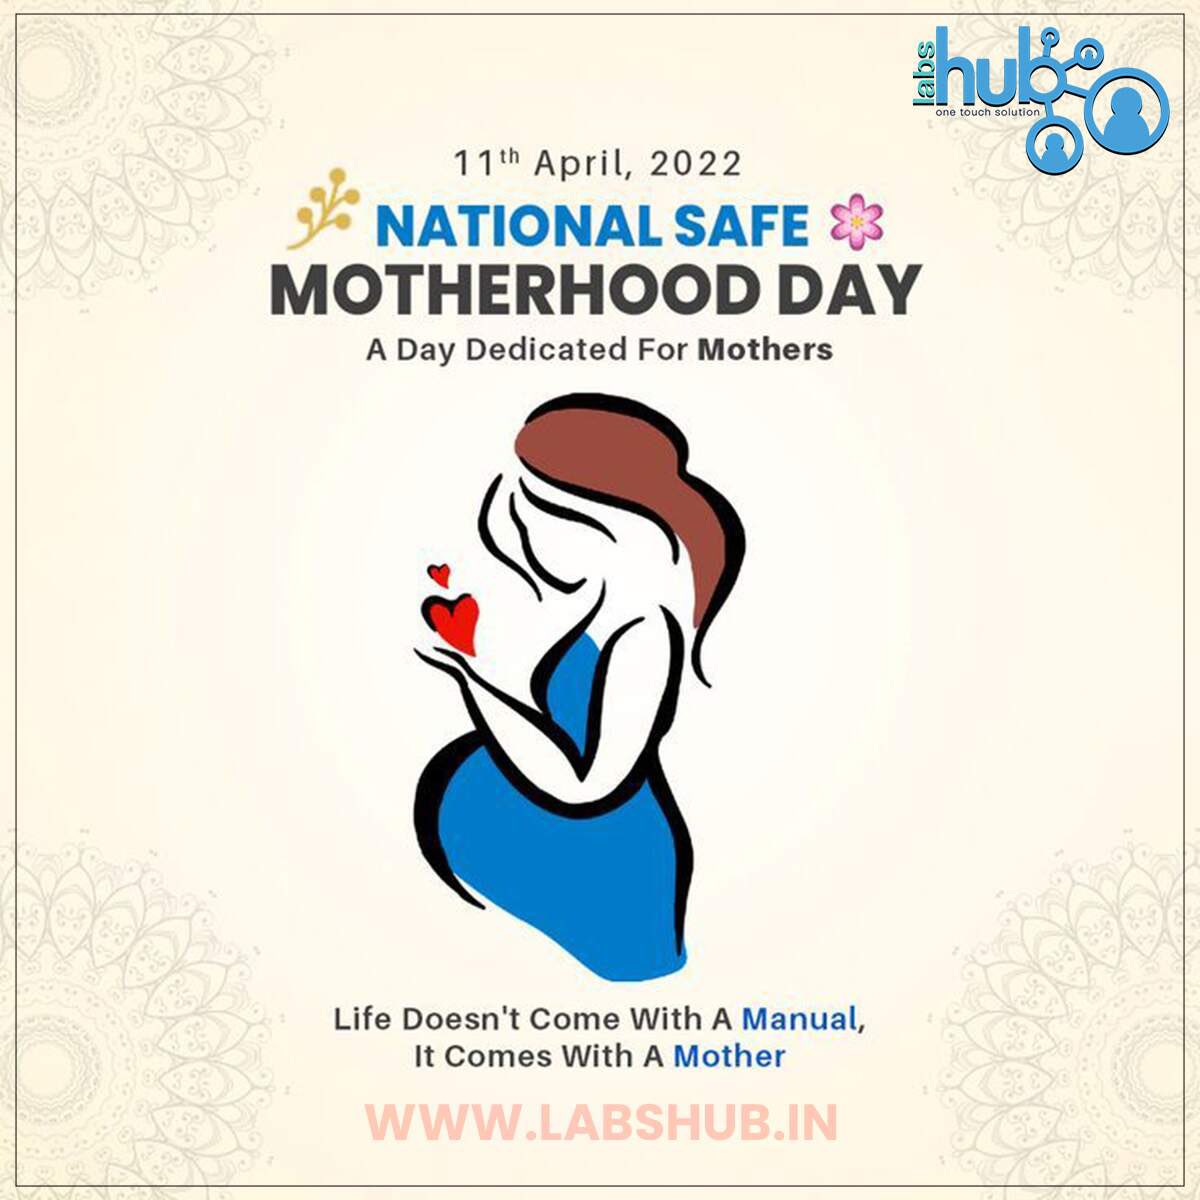 Let's take a moment to appreciate the courage and strength of all mothers who have given birth. On National Safe Motherhood Day, let's raise awareness about the importance of safe and respectful maternity care for all women. 

#sicherlabs #labshub #RespectfulMaternityCare